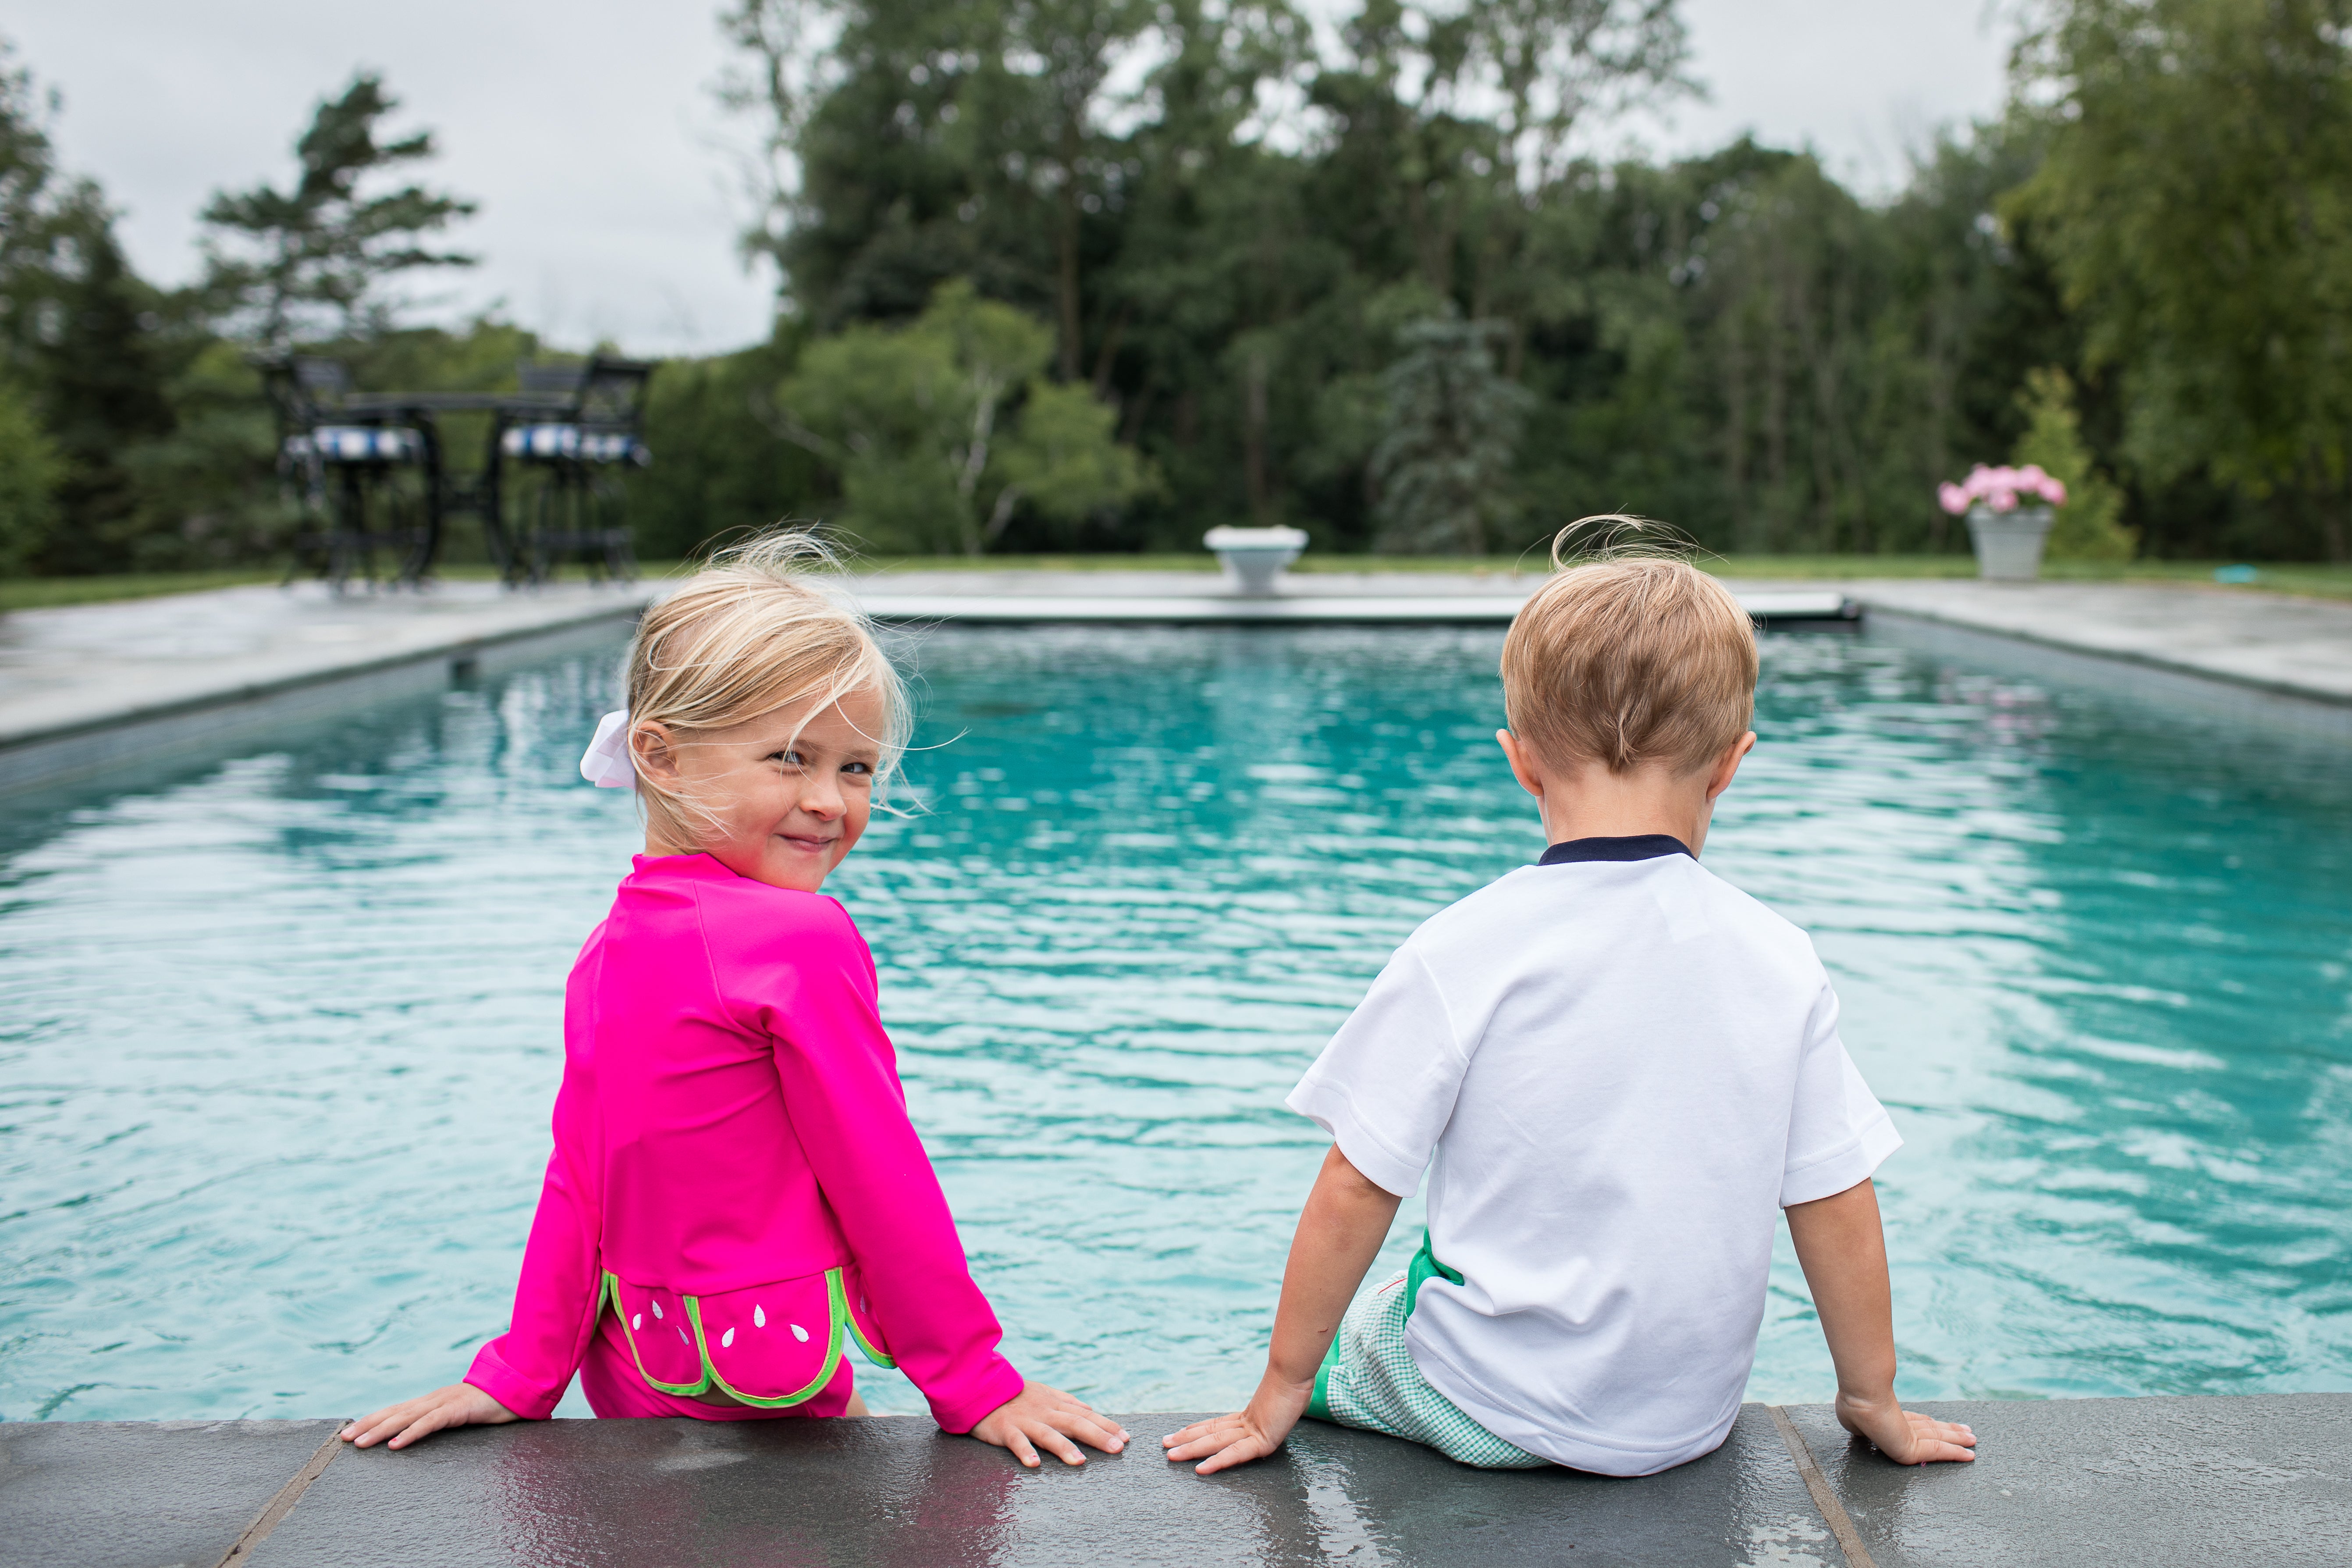 a young boy and girl by the pool, the girl, in a pink rashguard, is looking back and smiling